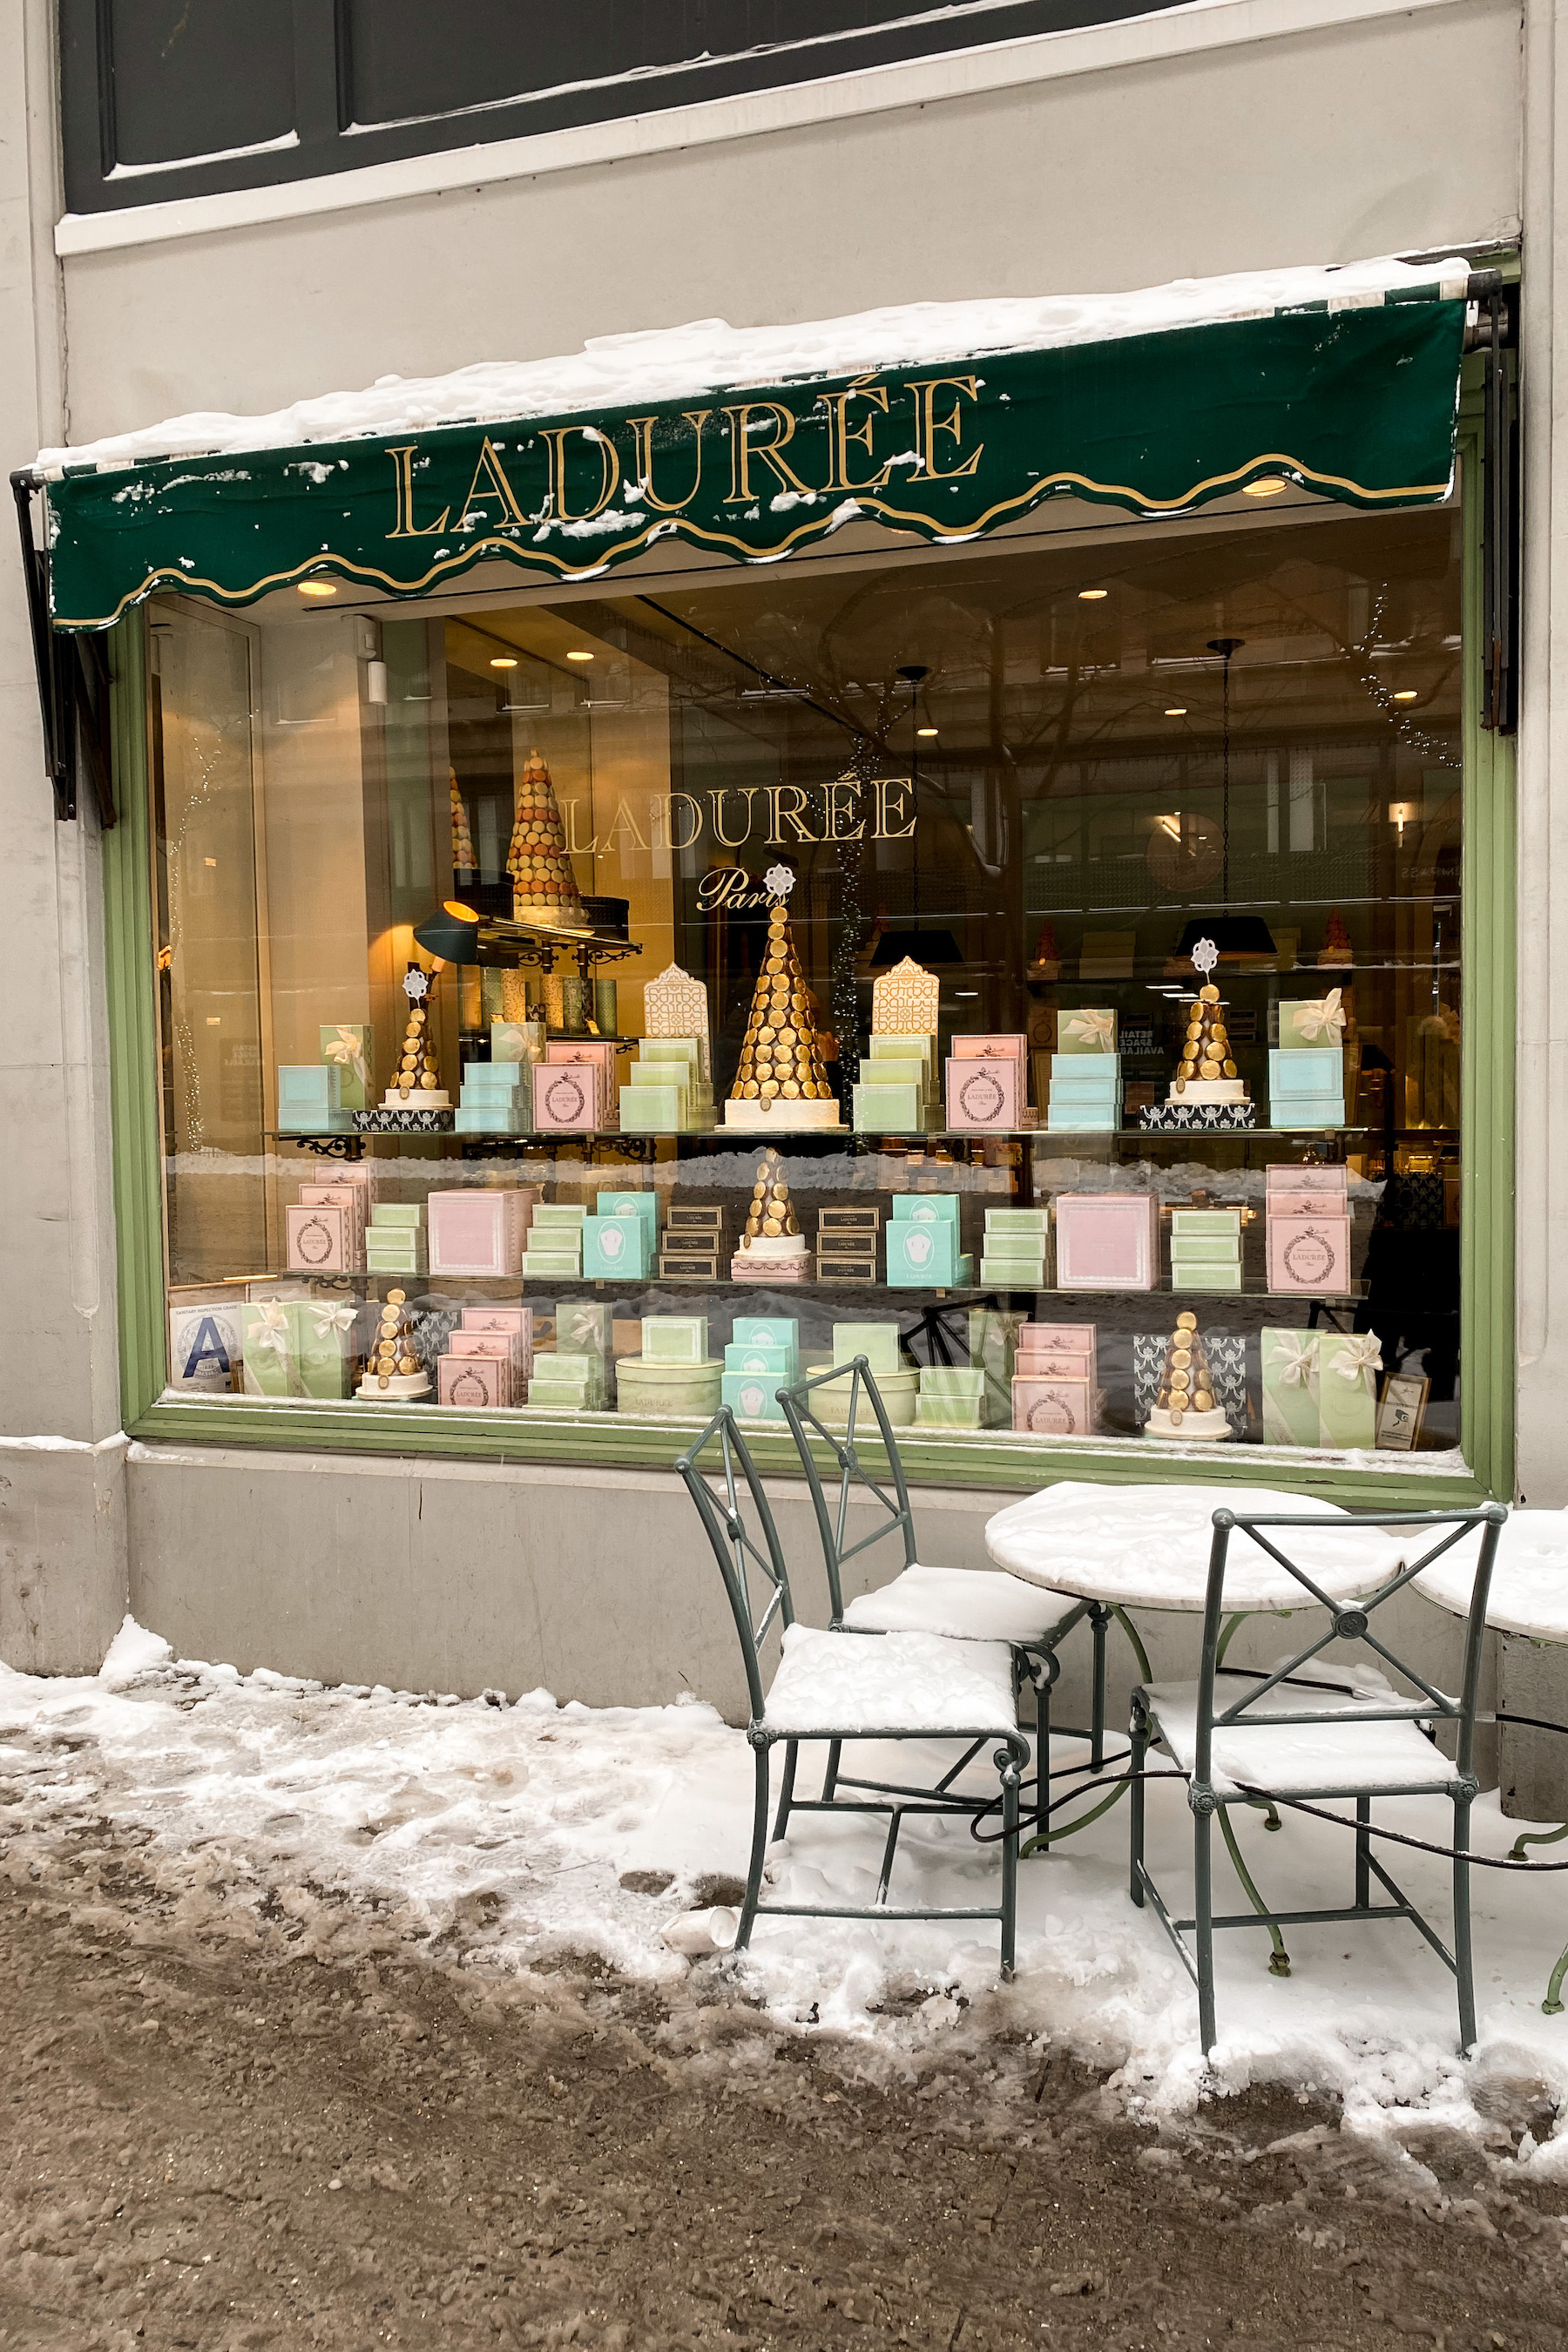 Ladurée NYC | A Snow Day in New York City